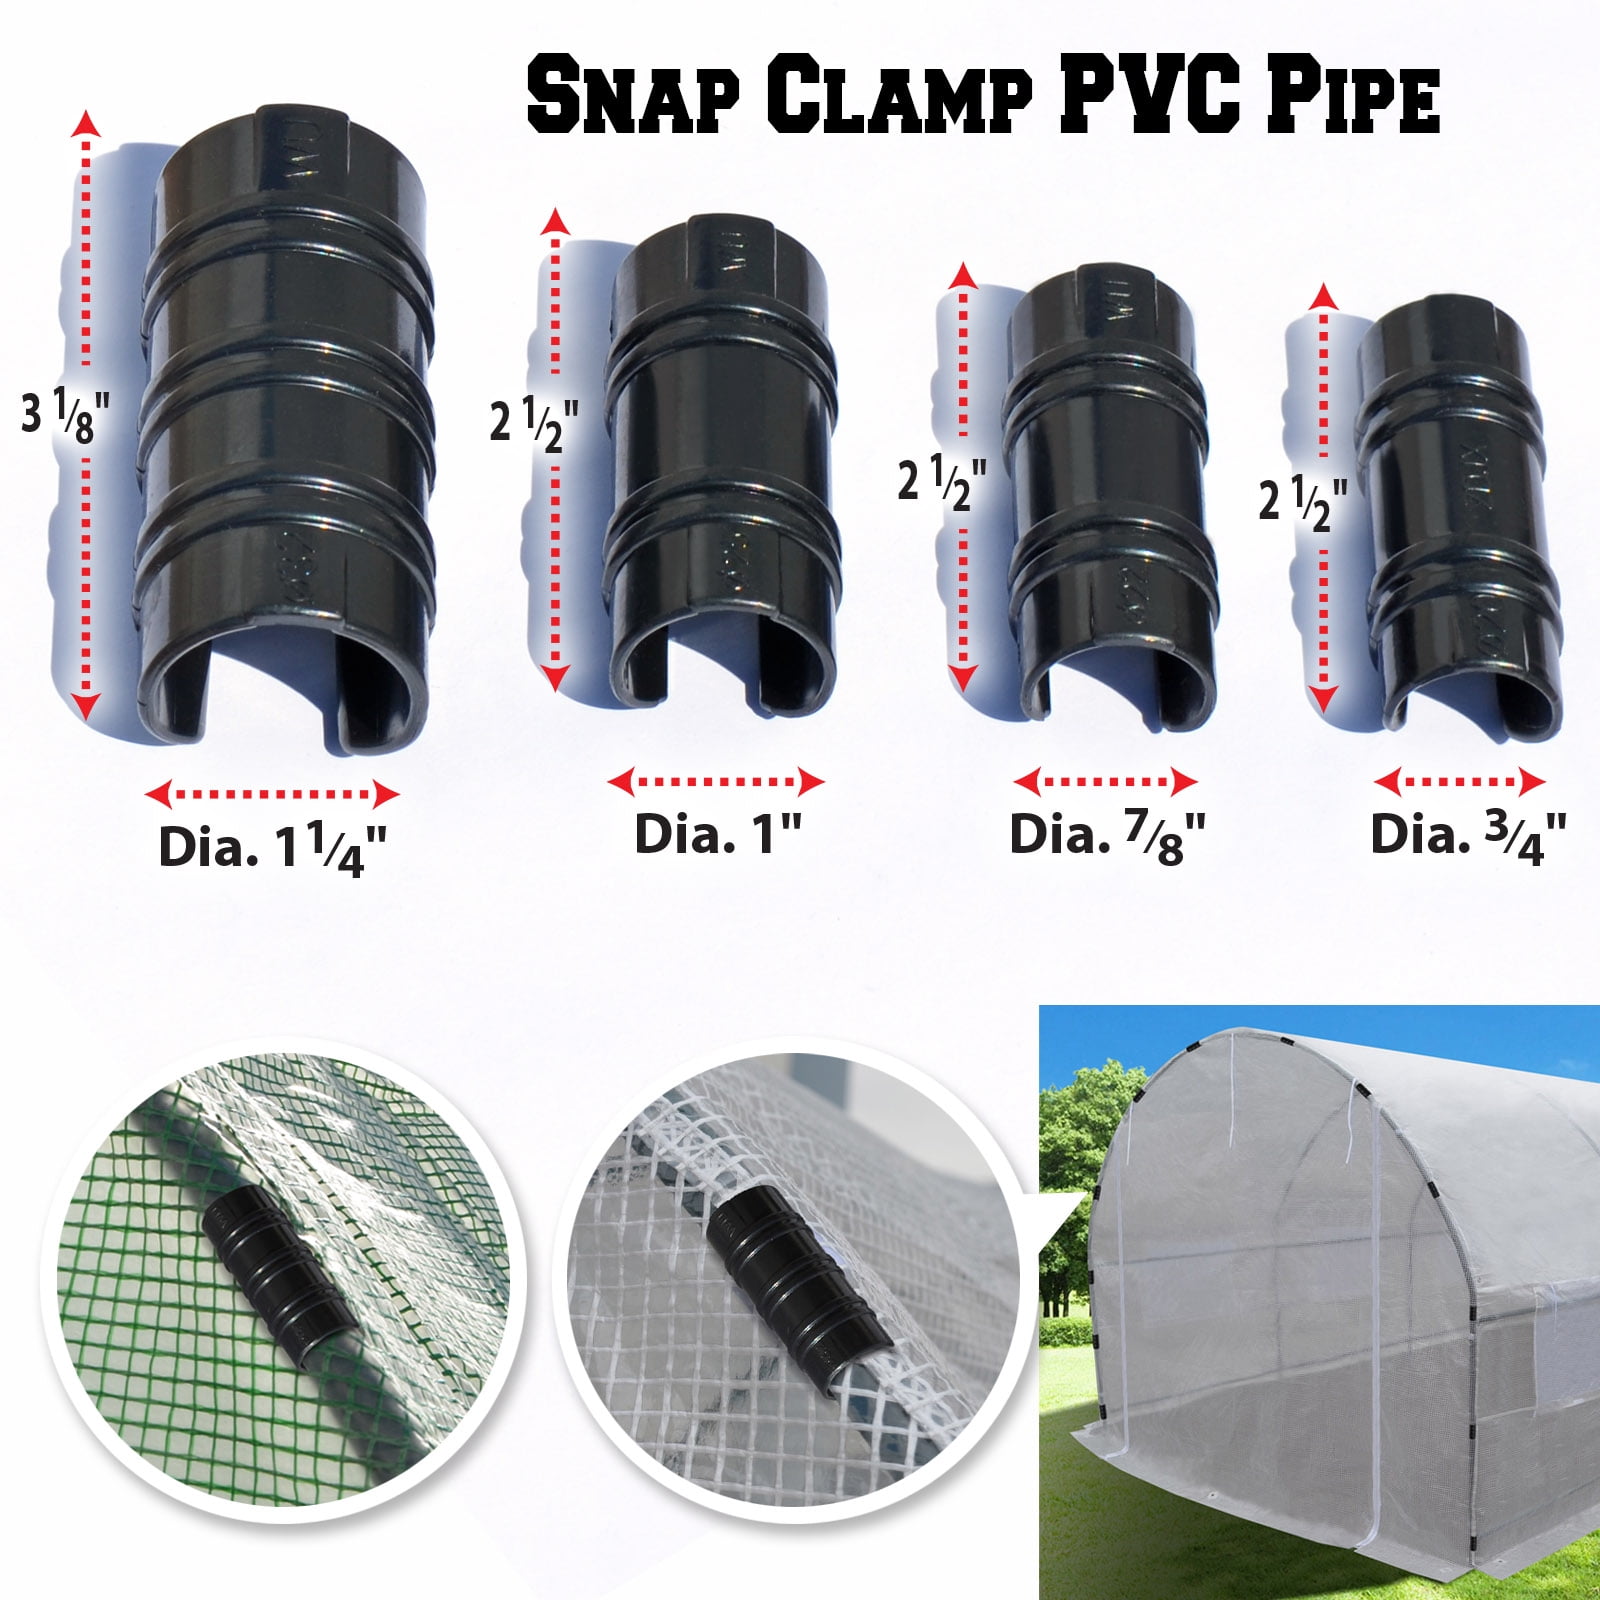 Astracast 32 Pieces White Snap Clamp for PVC Pipe Greenhouses Row Covers Shelters Bird 2.4 